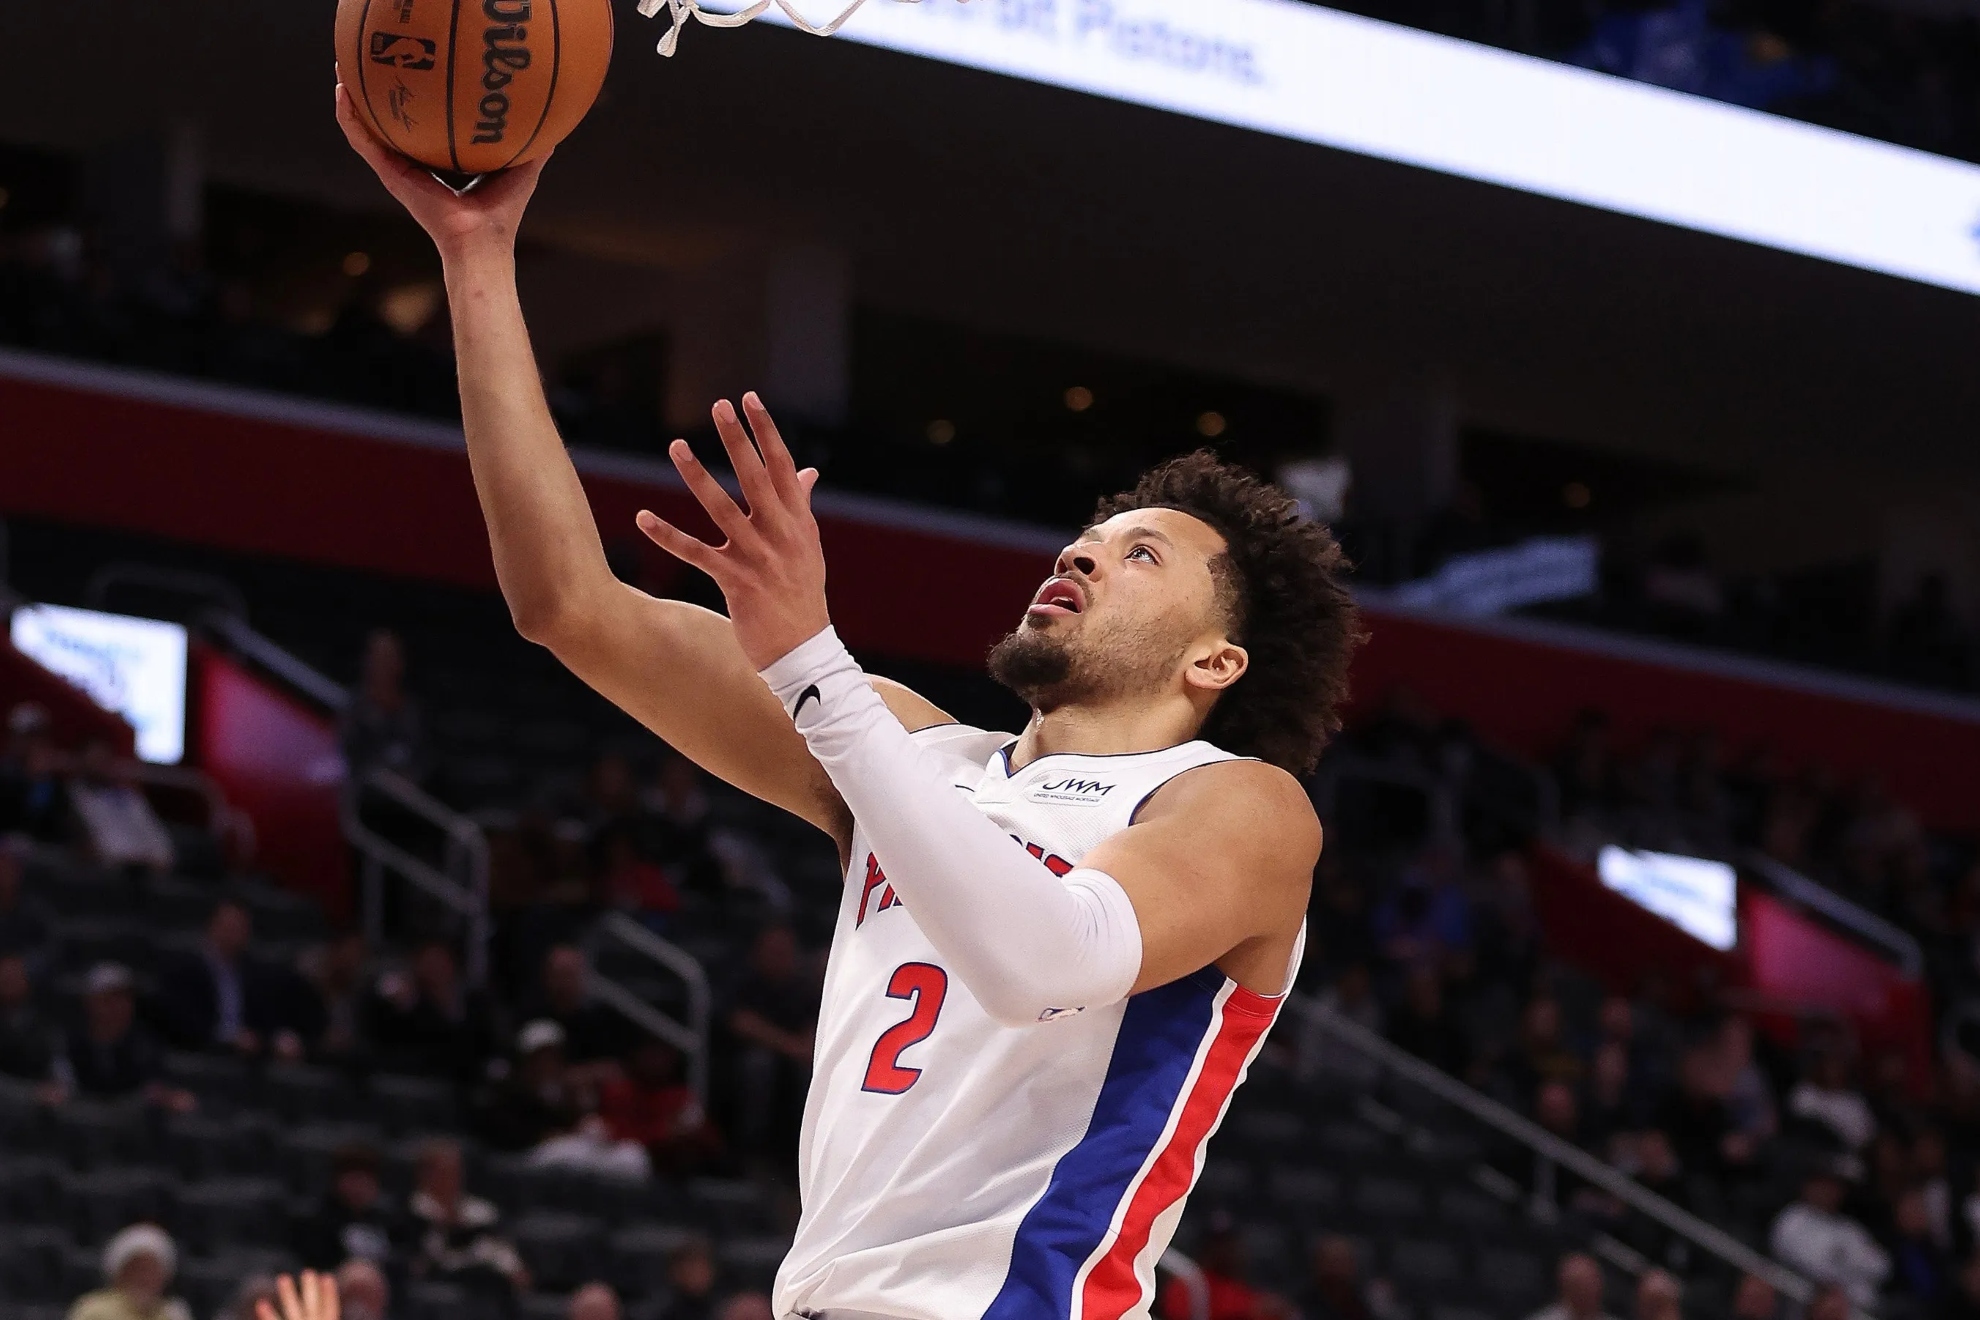 Cade Cunningham in action for the Pistons